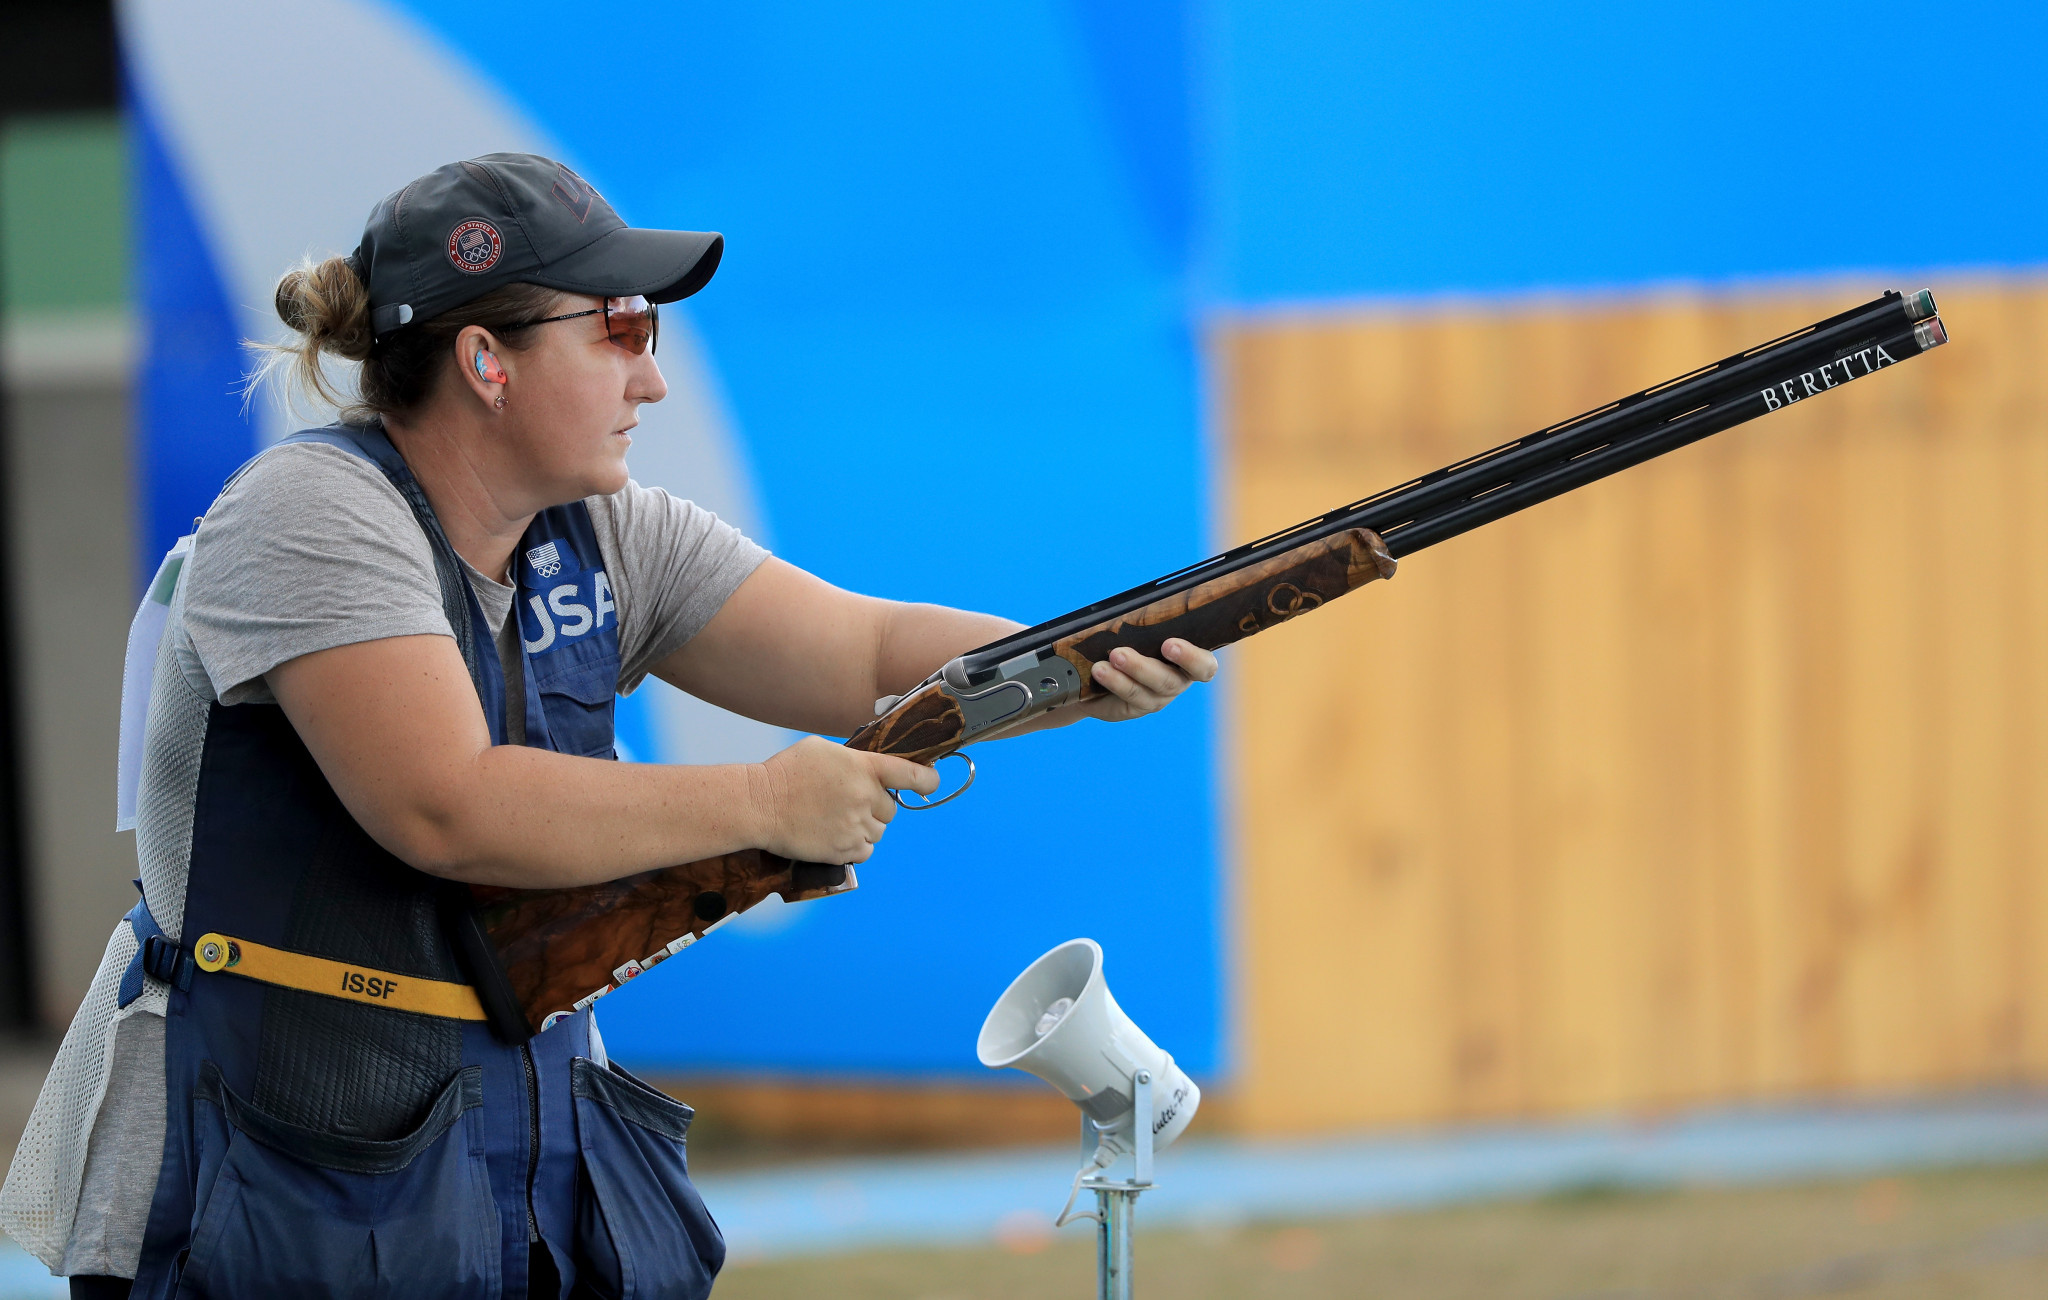 United States shooters are currently preparing for the Championship of the Americas in Mexico ©USA Shooting